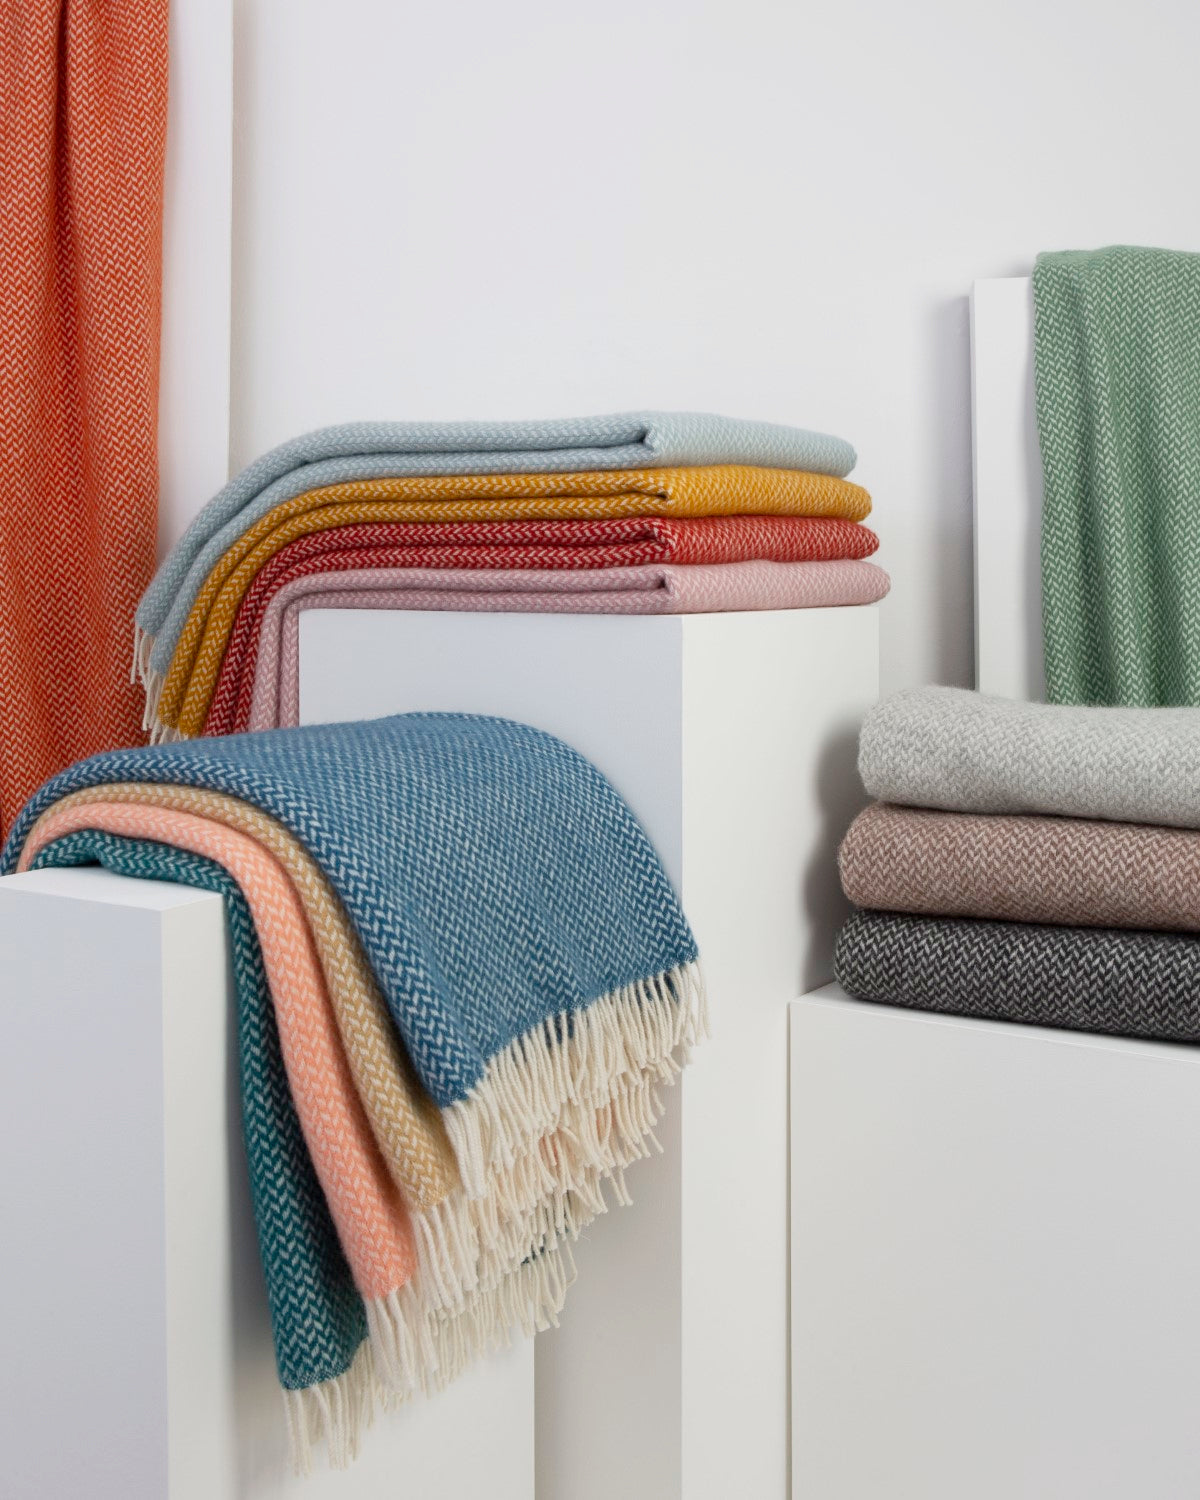 Folded wool blankets in various colours stacked on display plinths.